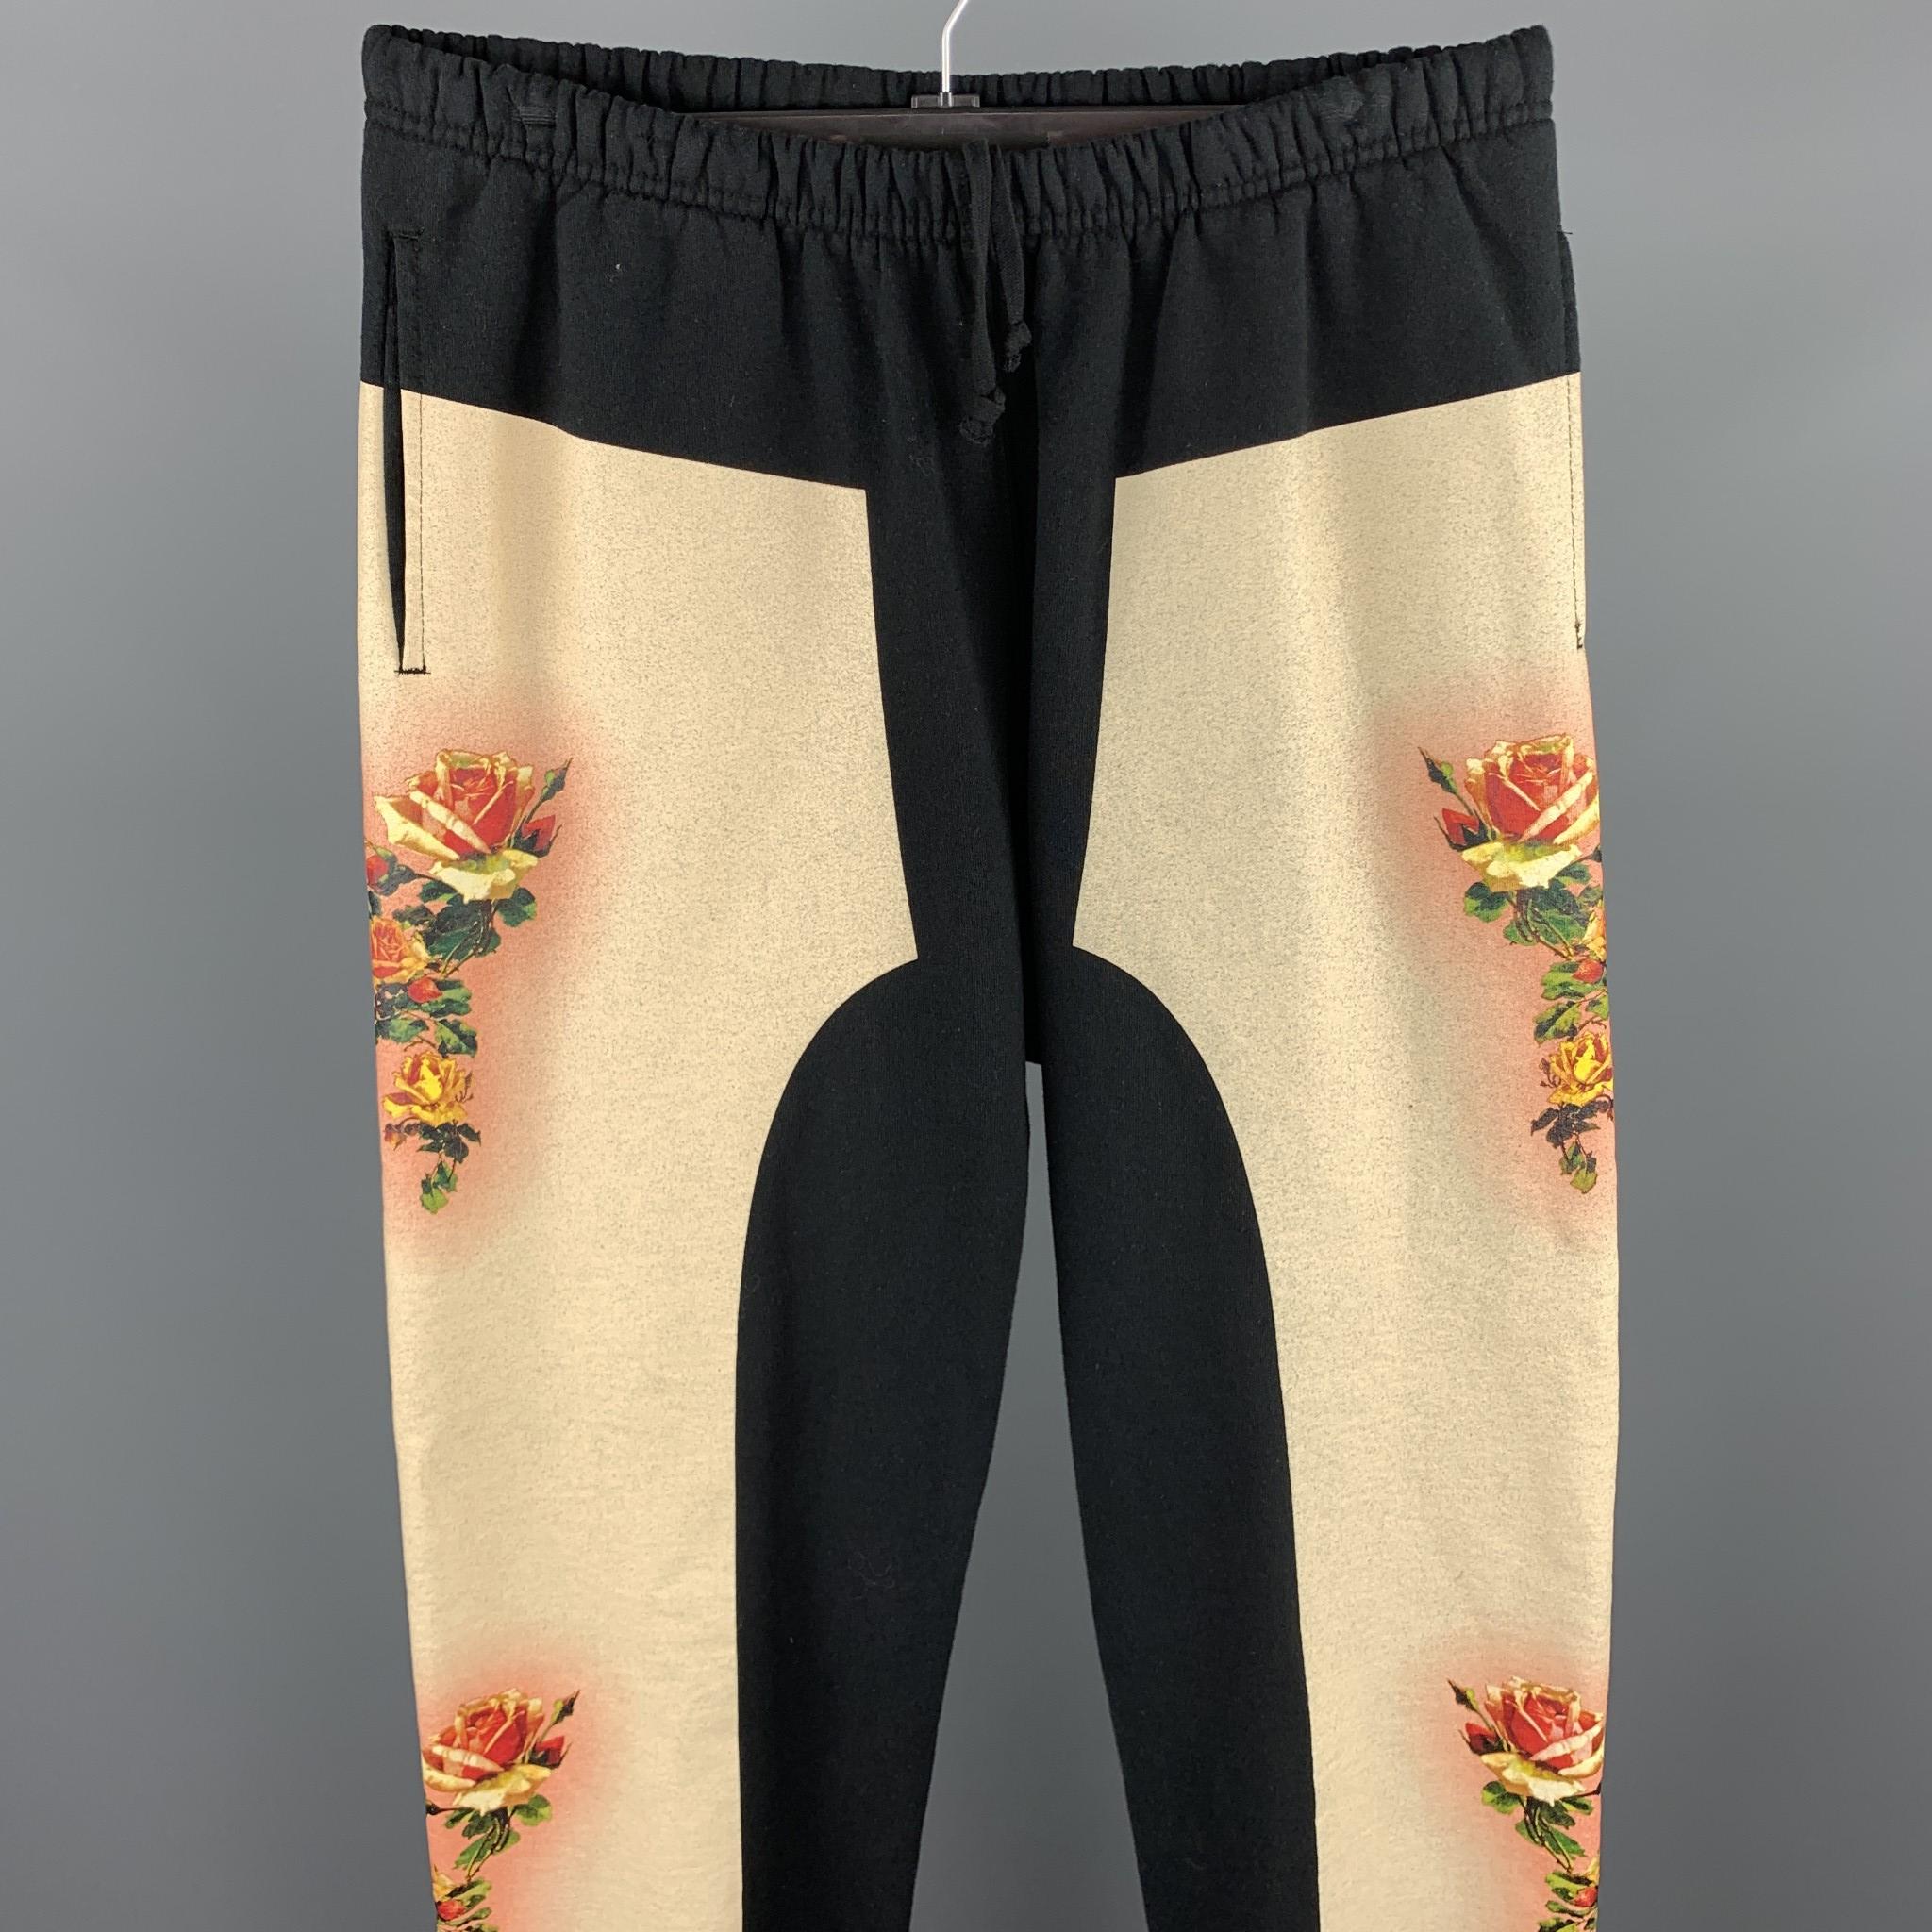 JEAN PAUL GAULTIER x SUPREME sweatpants comes in a black & beige cotton with a floral trim detail featuring a drawstring closure. Made in Canada.

Excellent Pre-Owned Condition.
Marked: XL

Measurements:

Waist: 34 in. 
Rise: 11.5 in. 
Inseam: 33